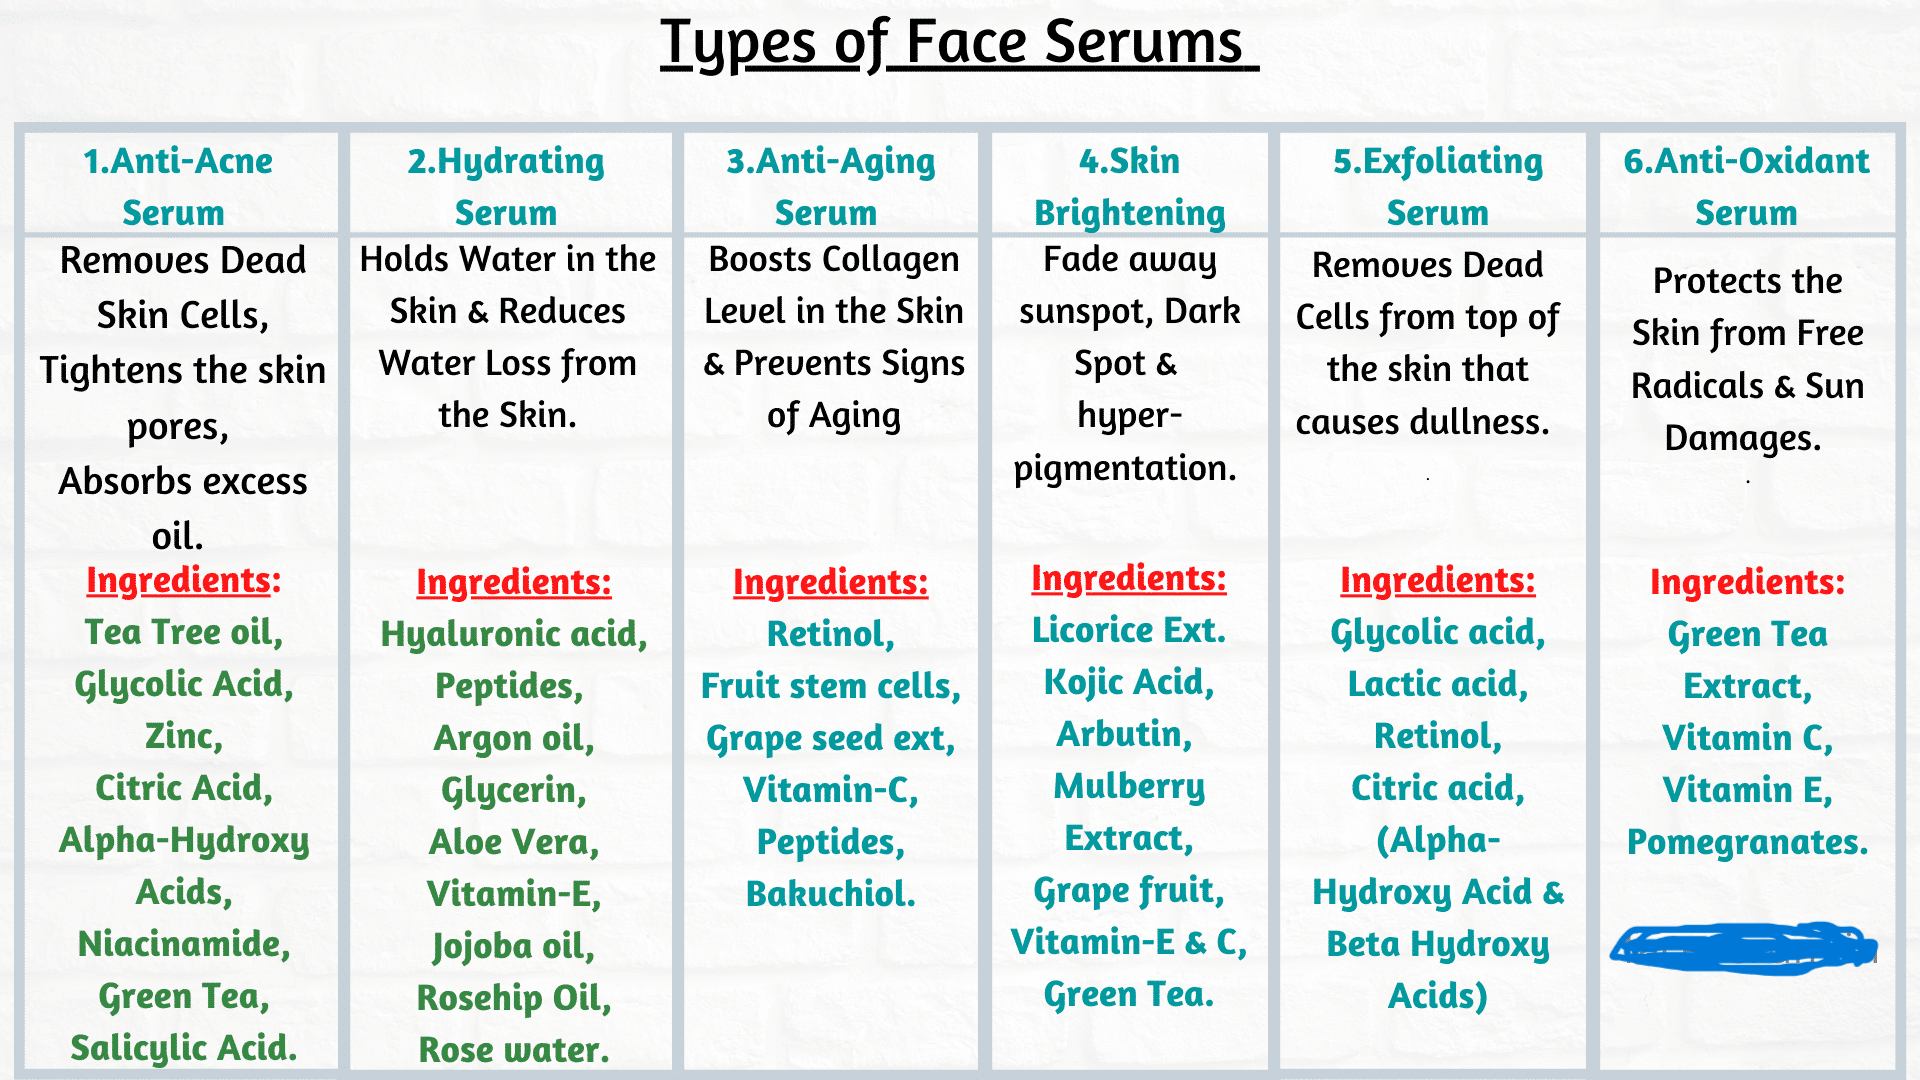 Types_of_Face_Serums1.png